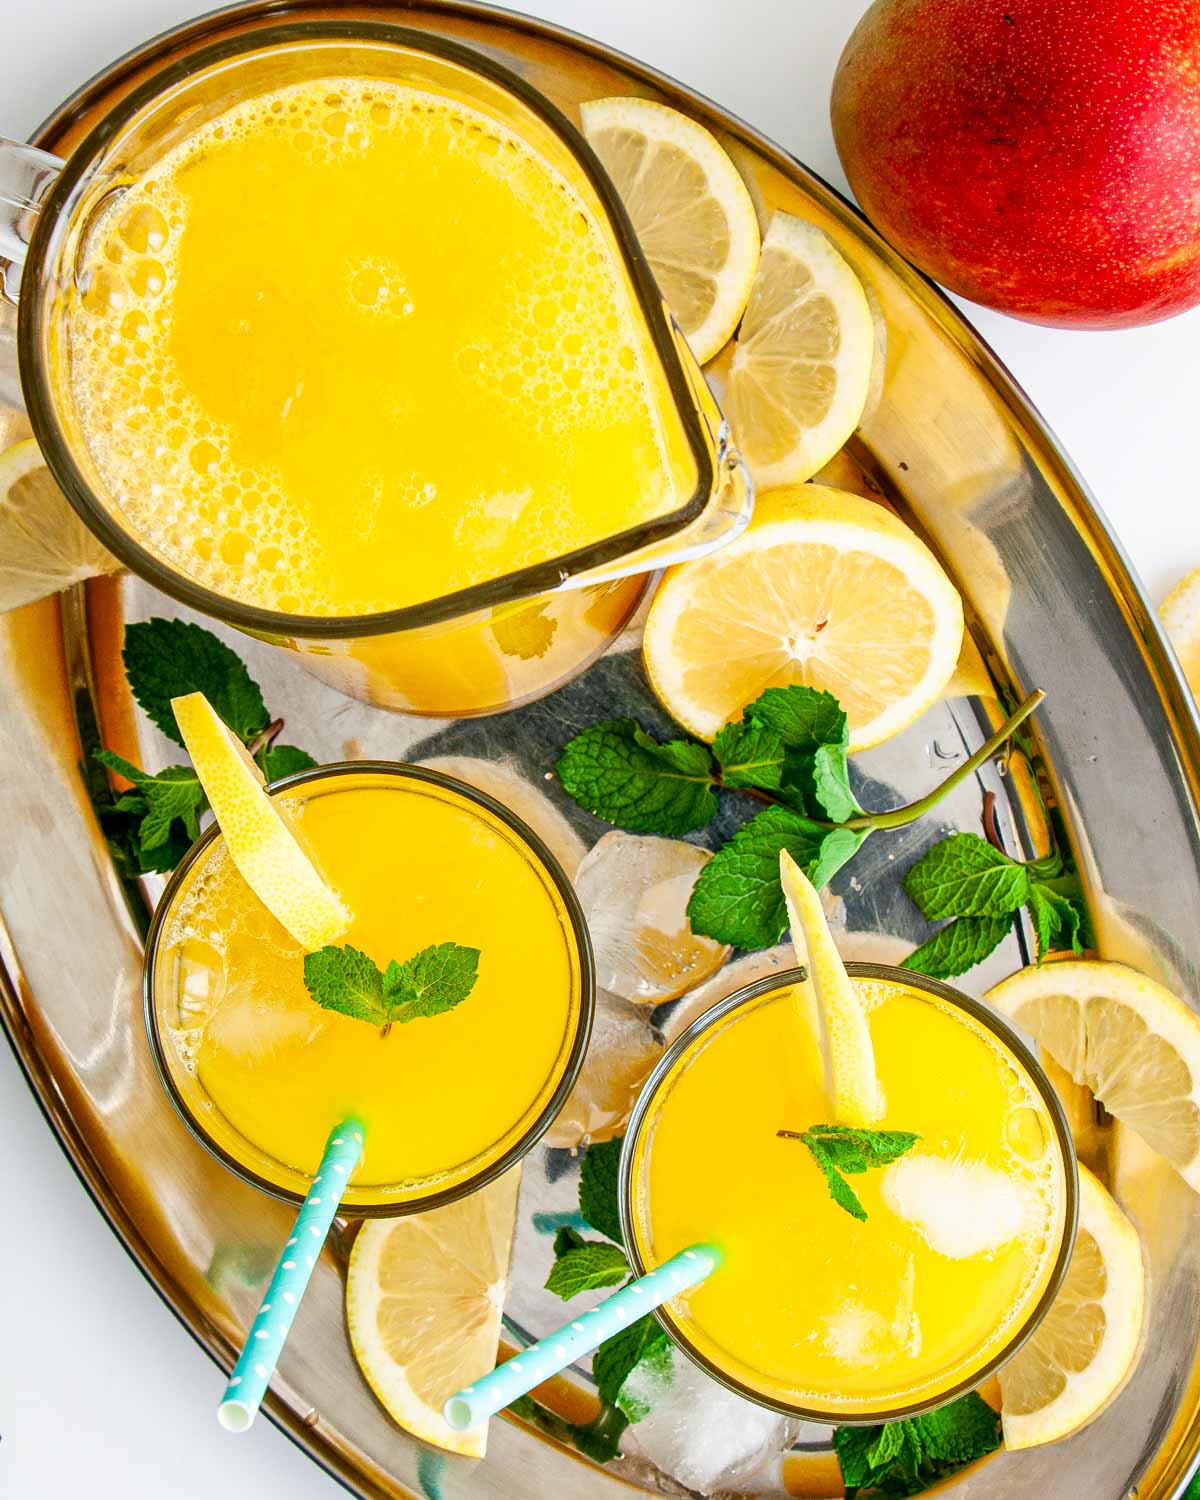 a pitcher and two glasses filled with mango lemonade on a serving tray garnished with lemon slices and mint